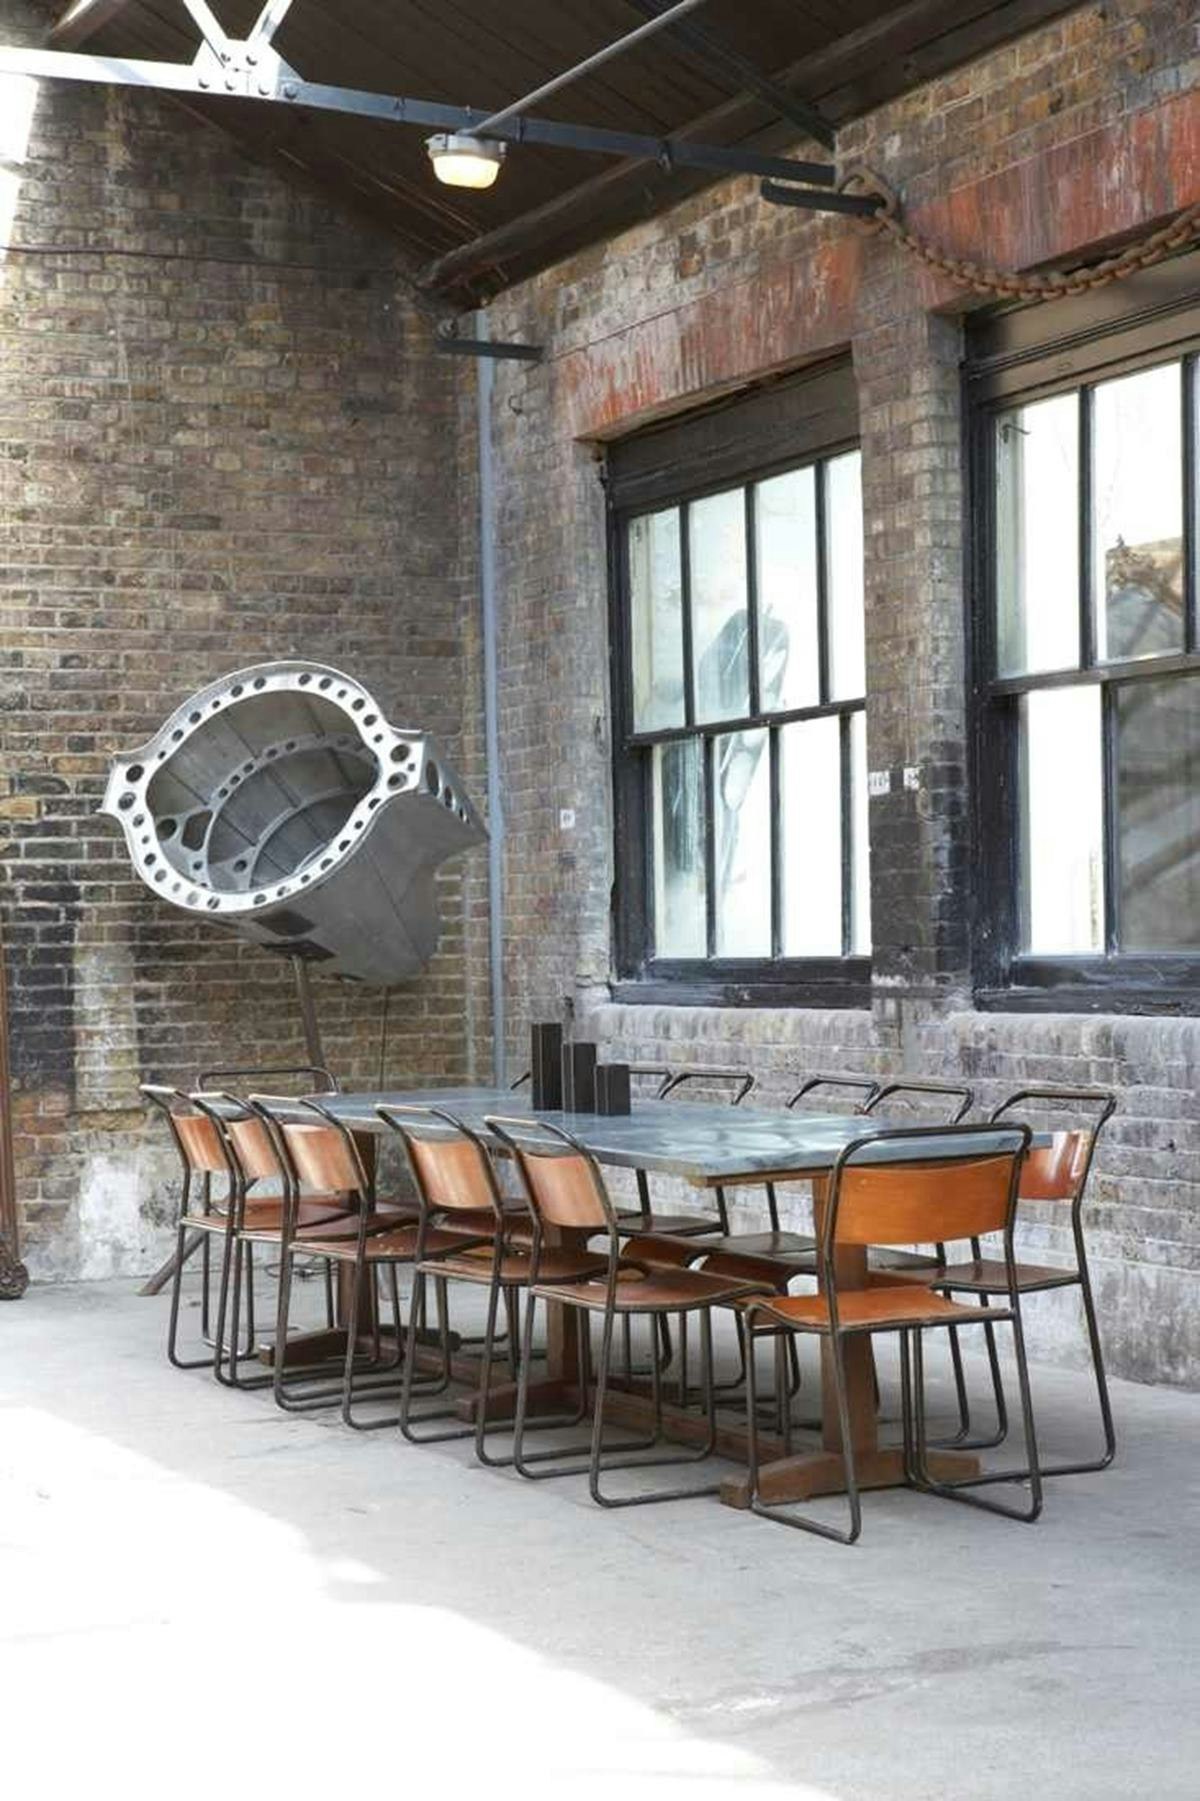 This industrial space